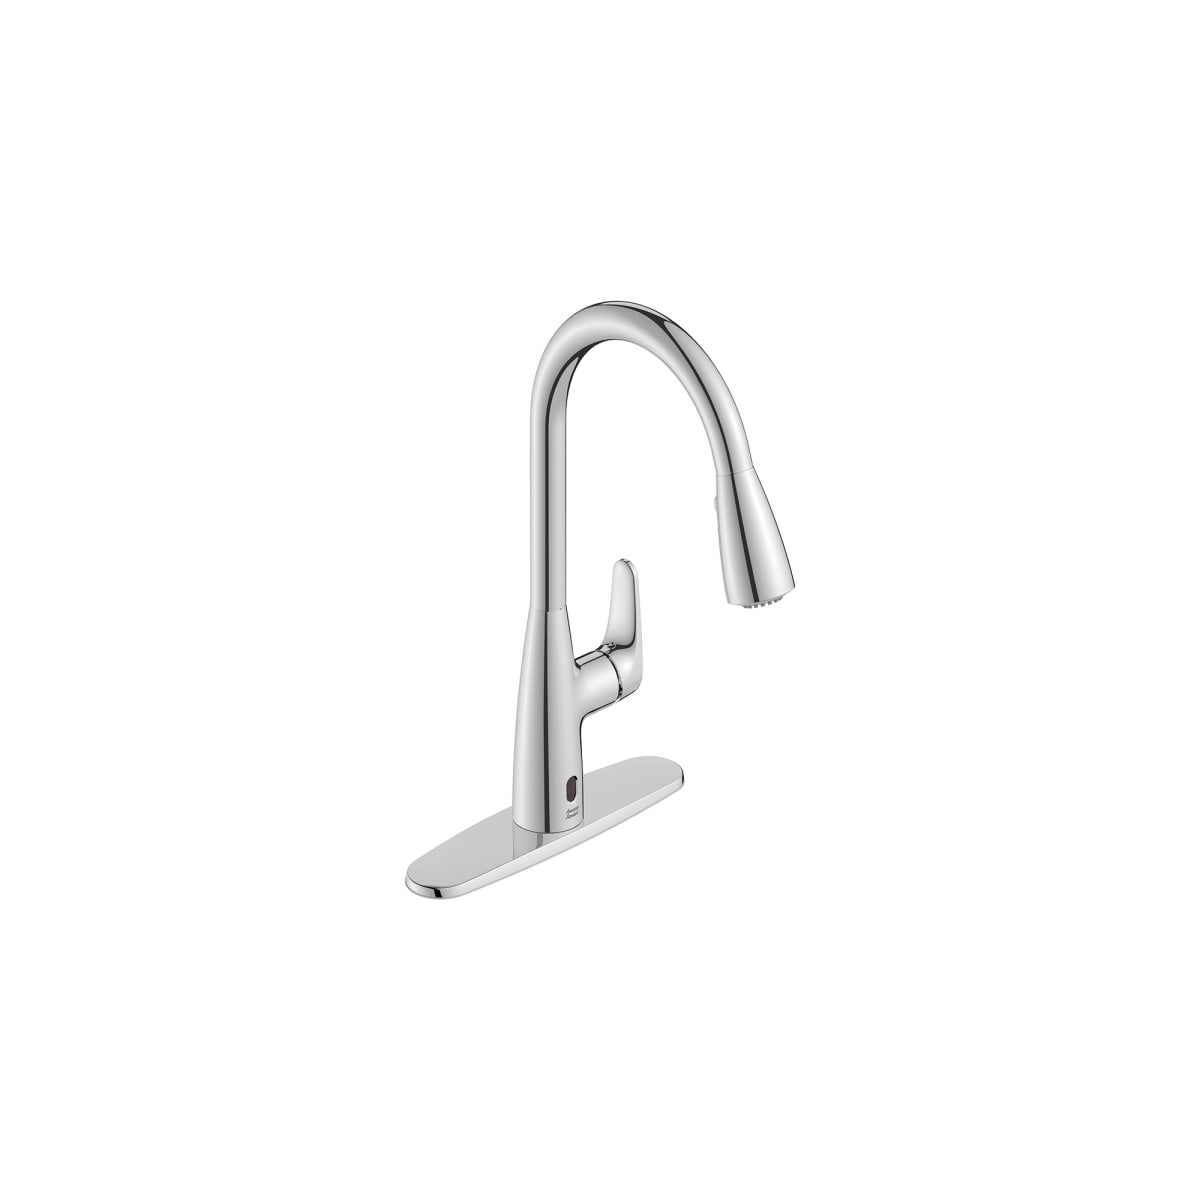 Beale® Single-Handle Pull-Down Dual Spray Kitchen Faucet 1.5 gpm/5.7 L/min